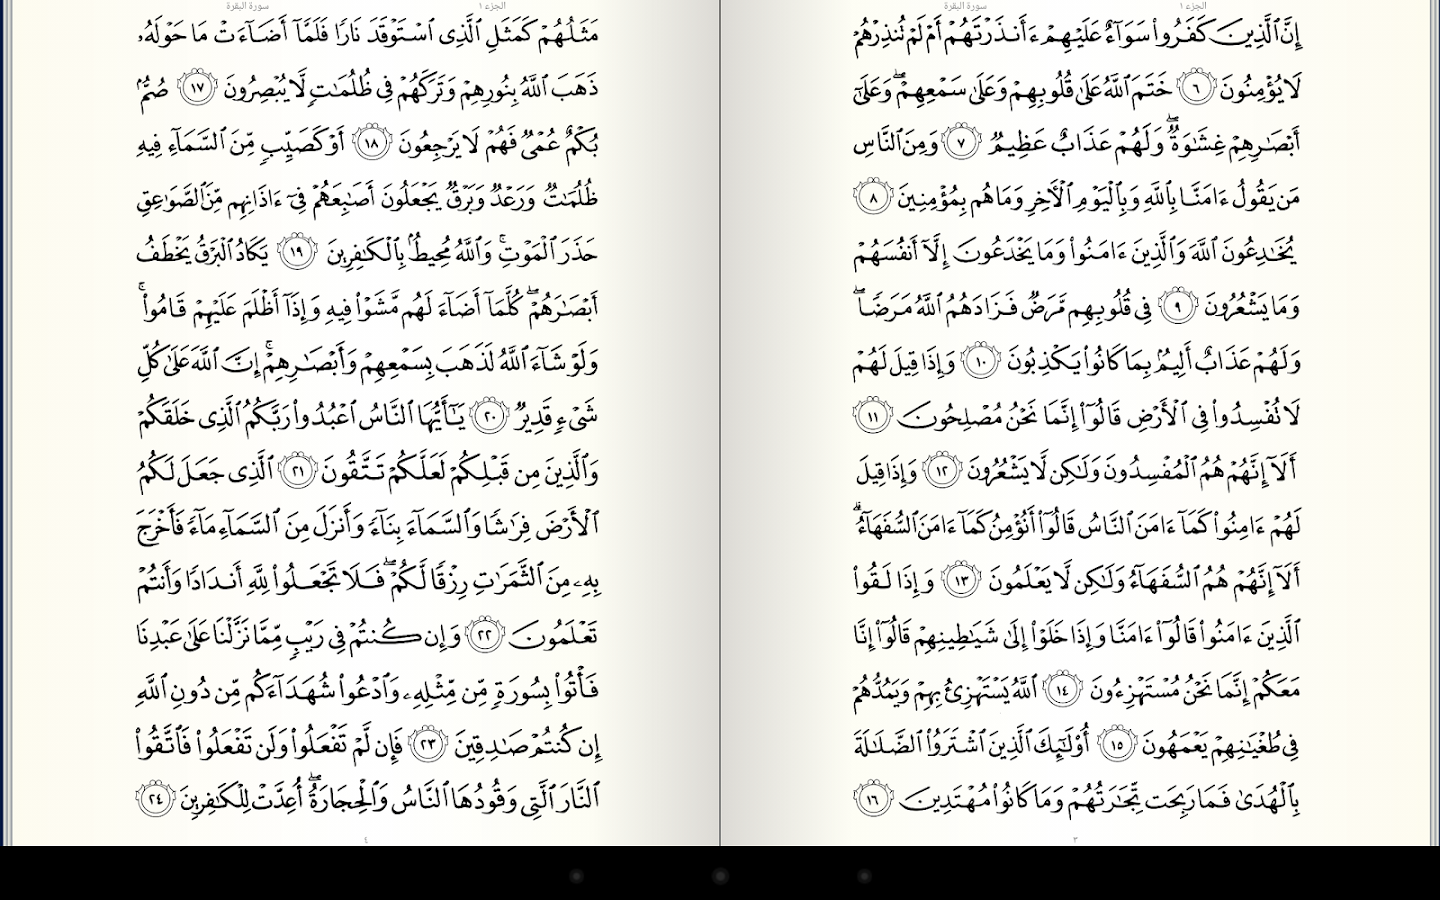    Quran for Android- screenshot  